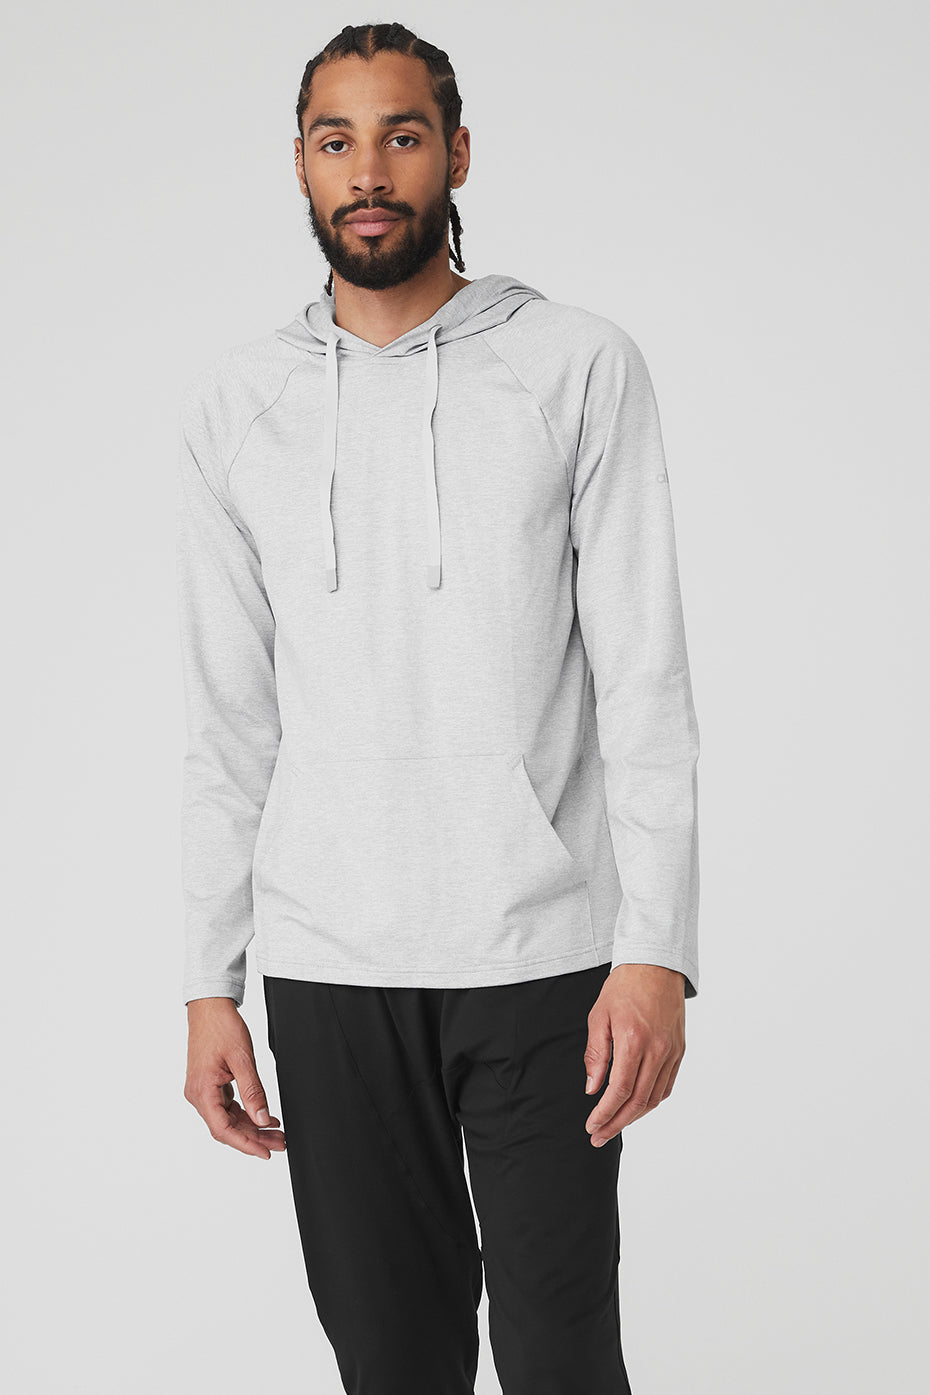 Thin Hoodies for Men Athleitc Dry Fit (32-Charcoal Heather,XS) at   Men's Clothing store